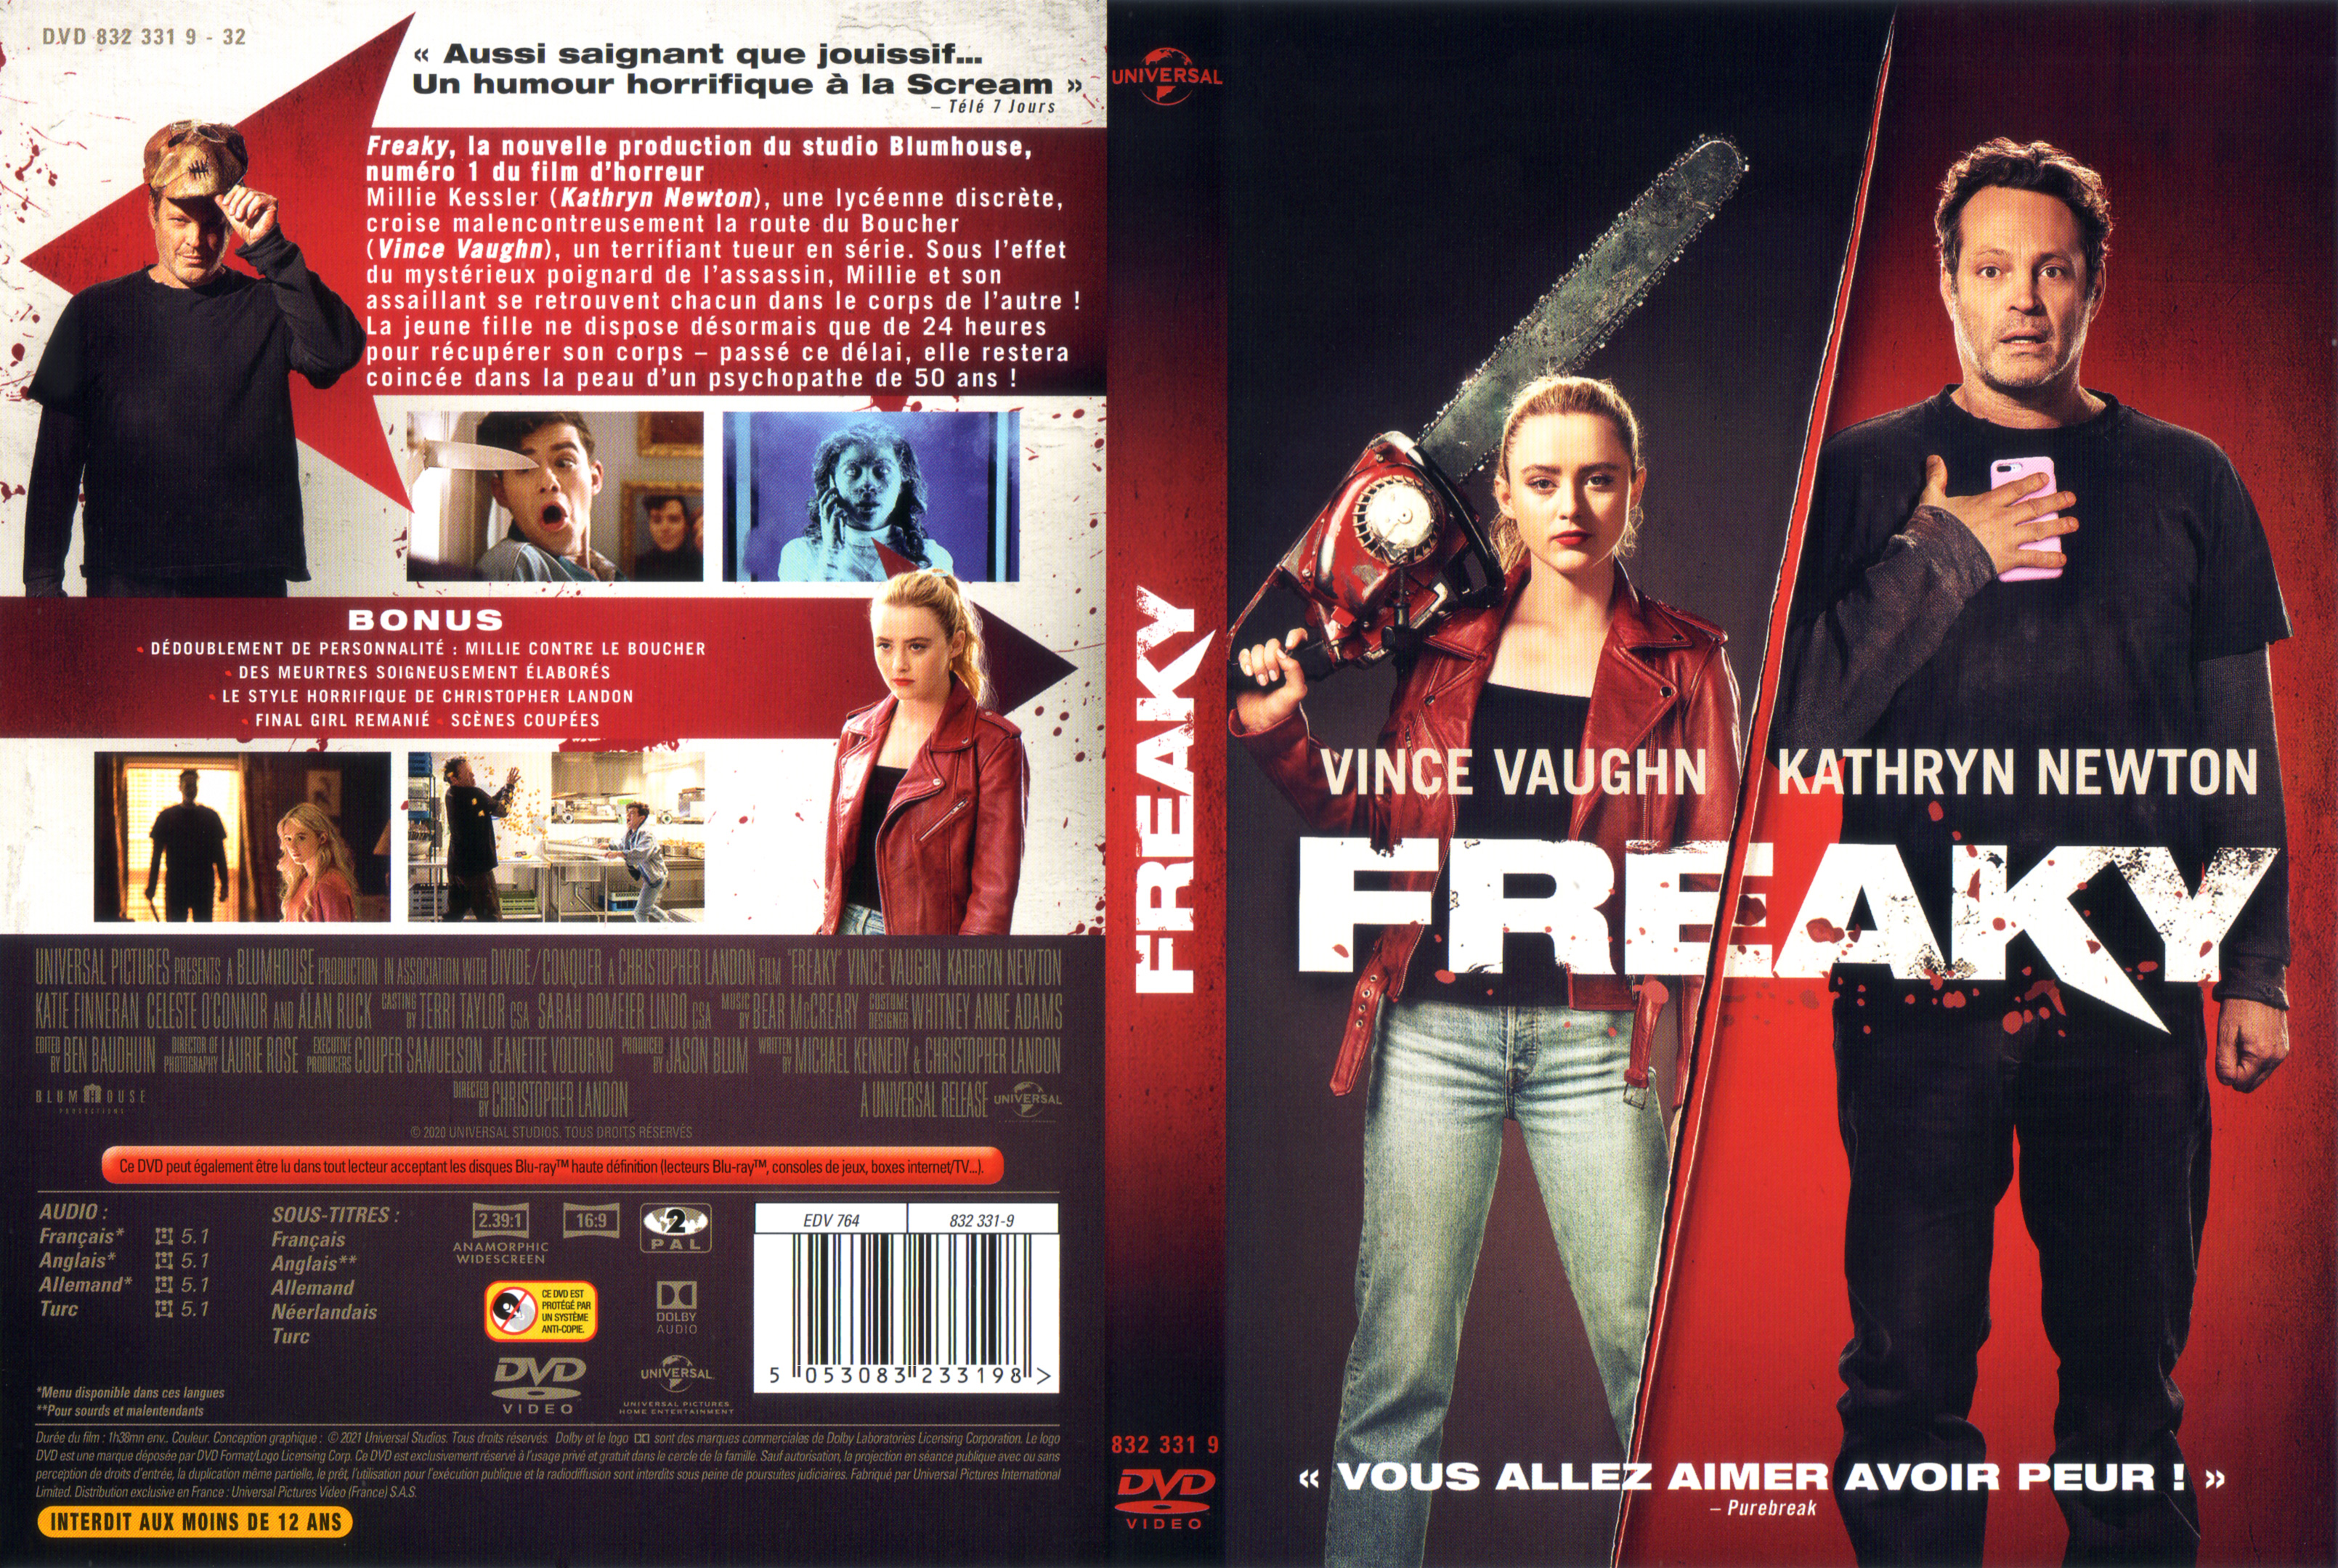 Jaquette DVD Freaky